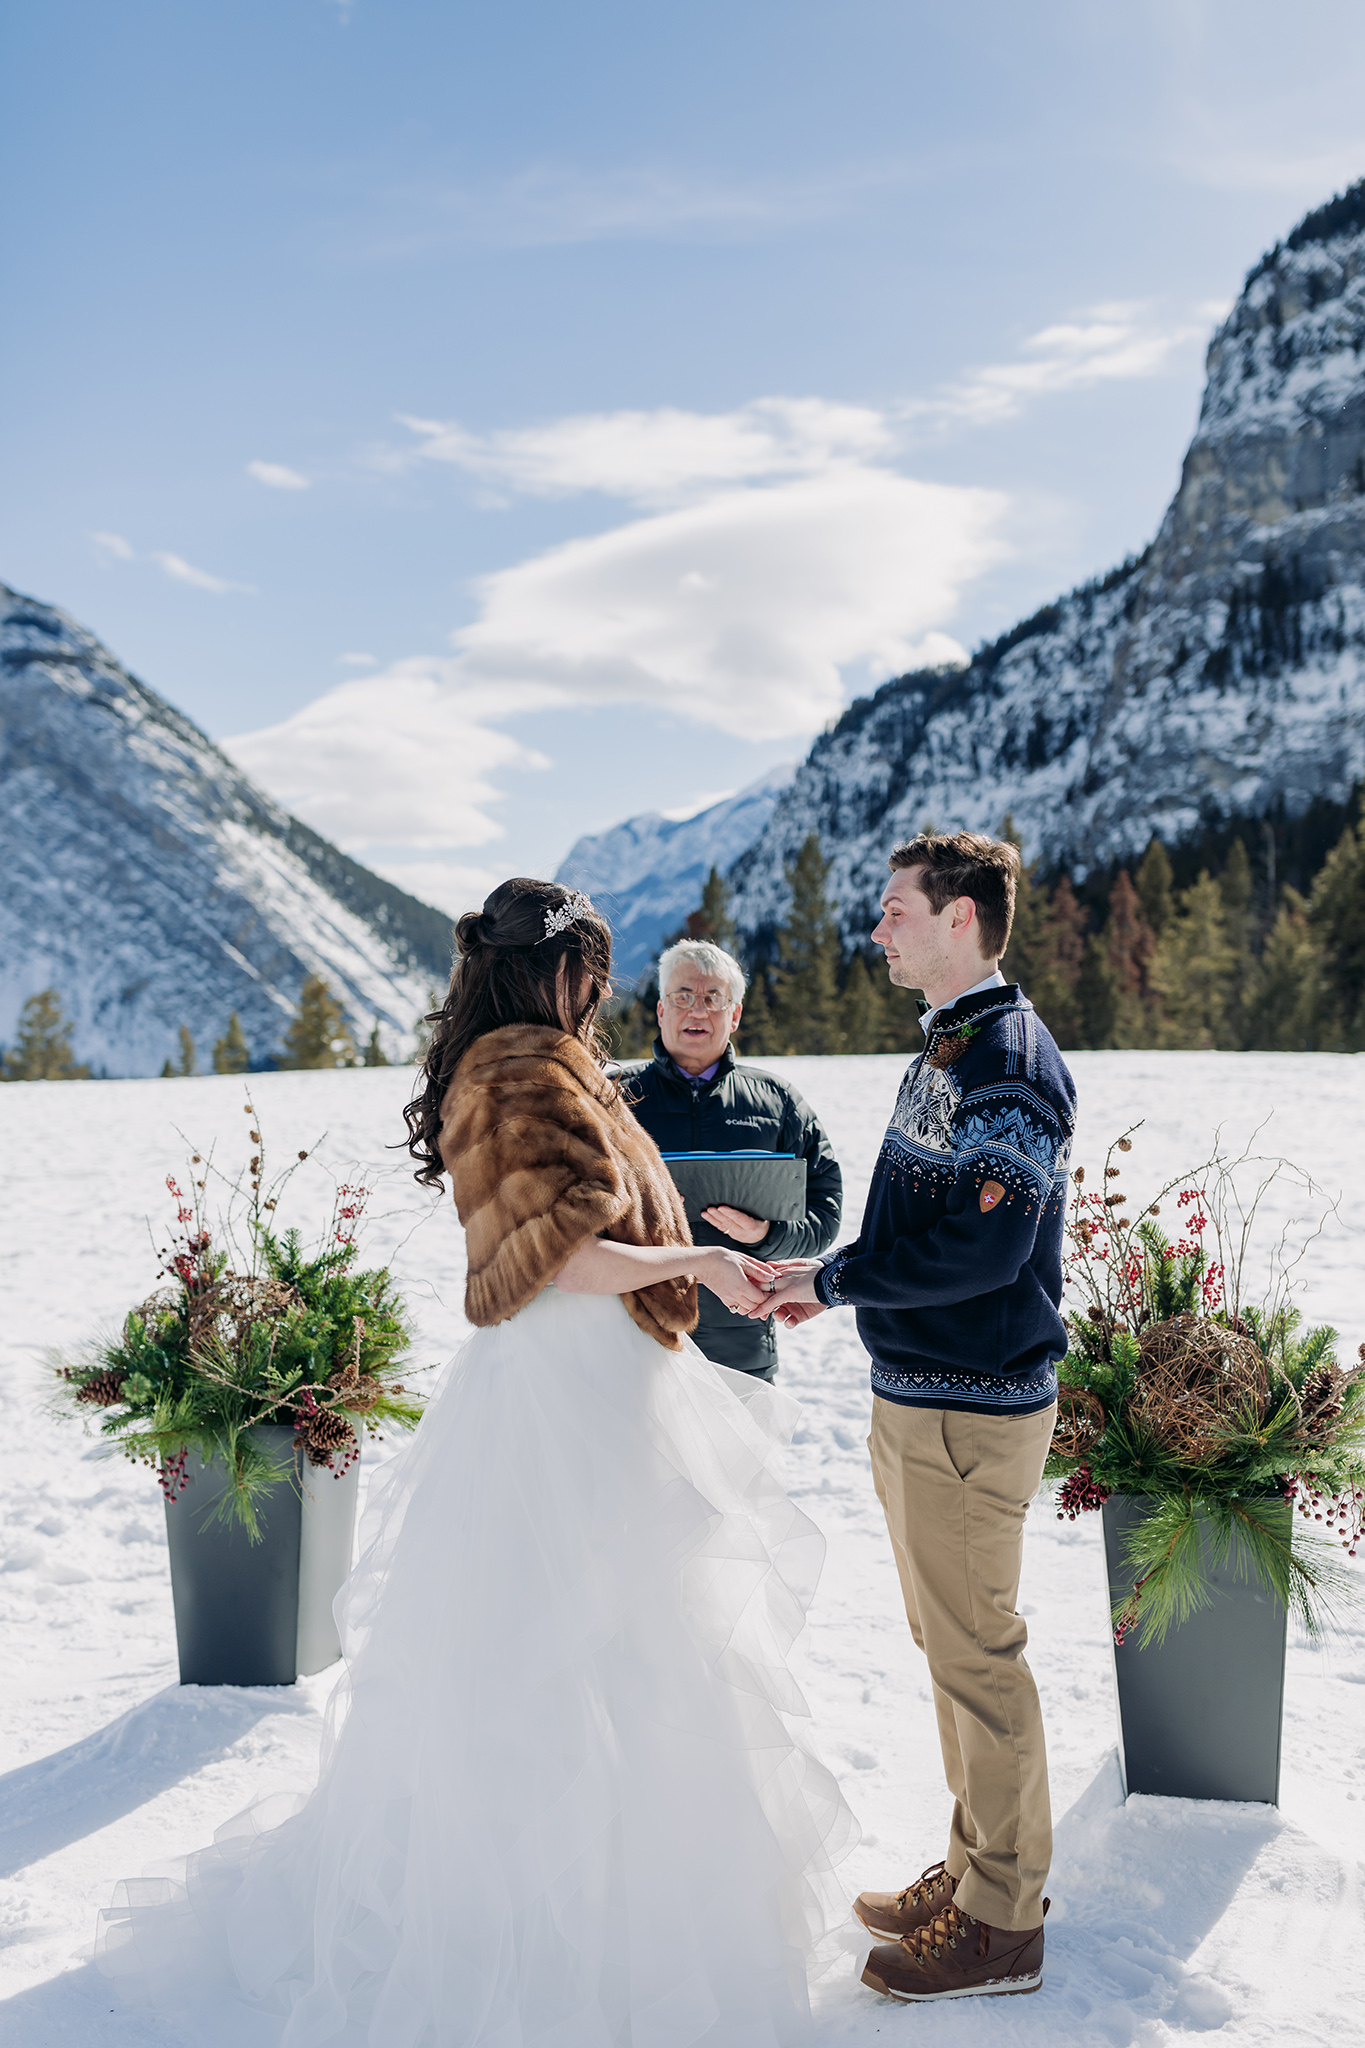 Tunnel Mountain winter wedding ceremony in Banff National Park photographed by ENV Photography